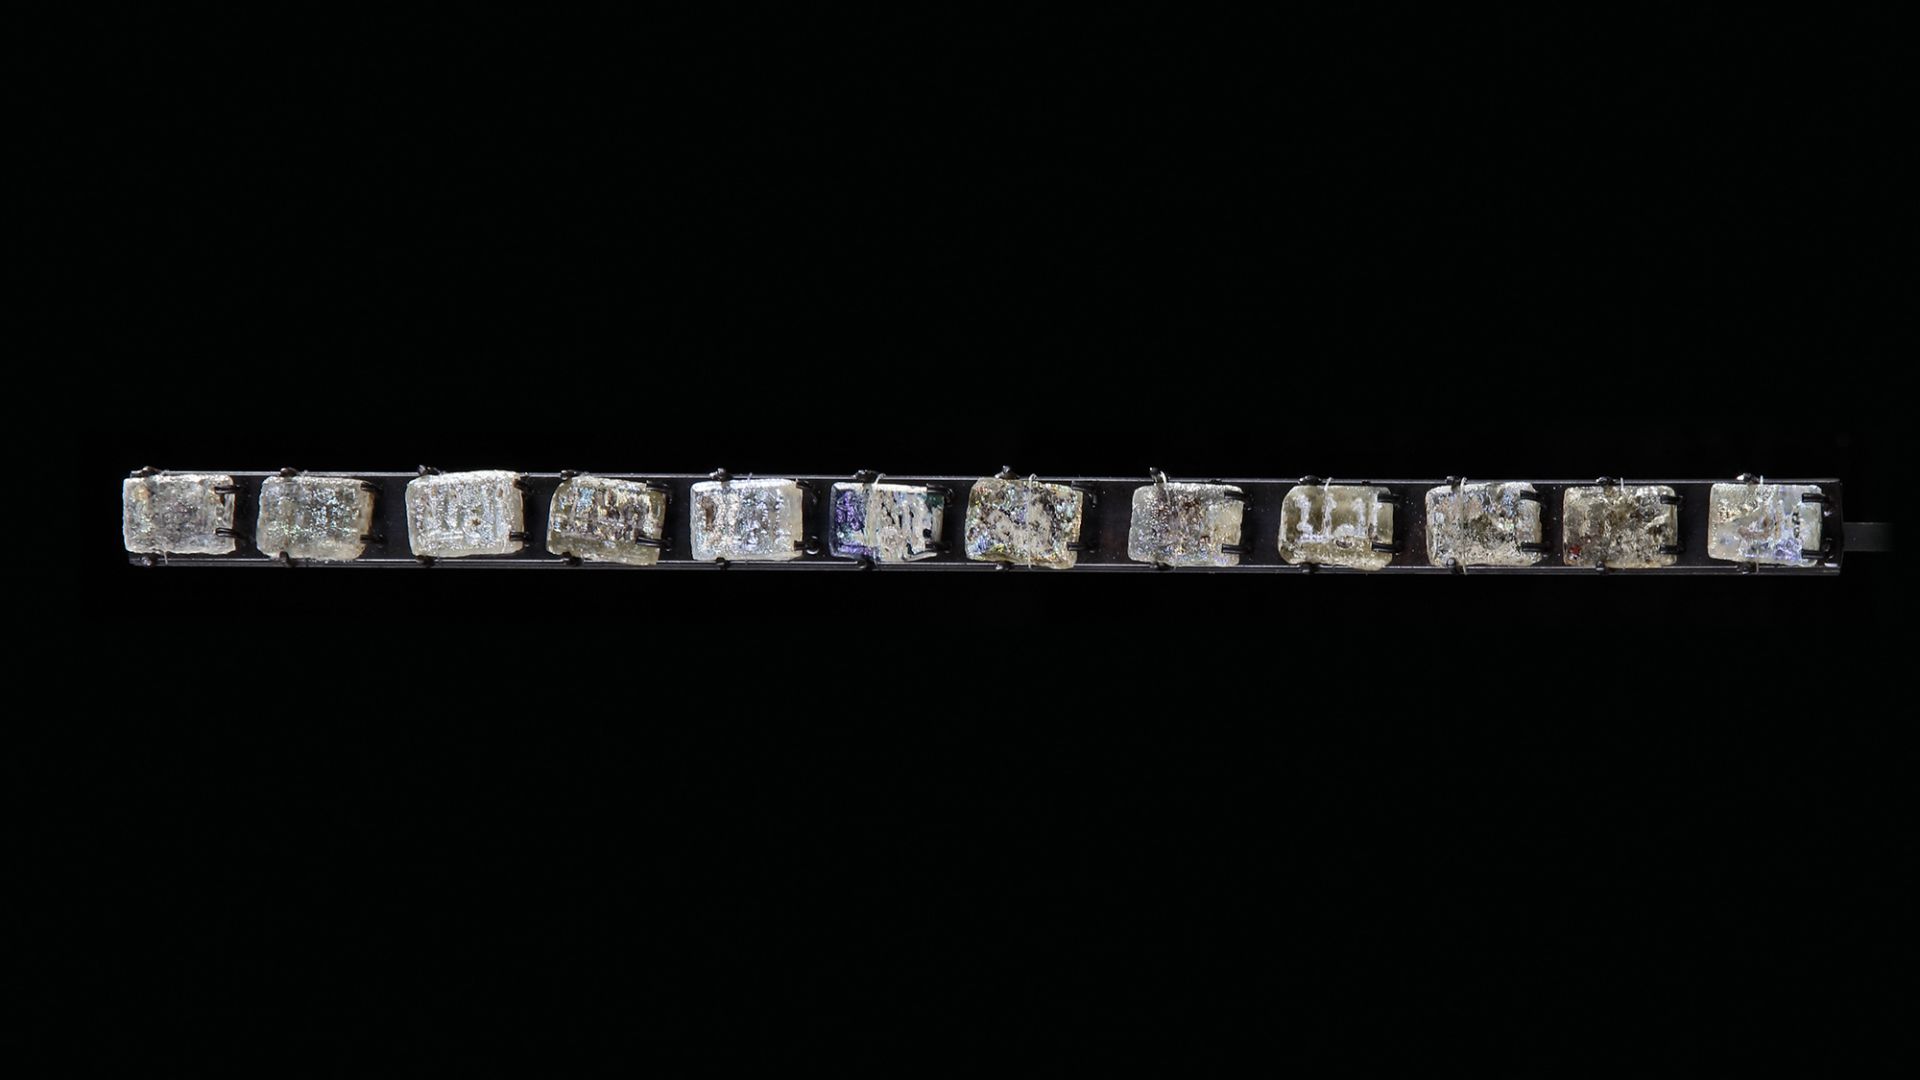 TWELVE GLASS MOULDED FRAGMENTS, PERSIA OR CENTRAL ASIA, 10TH-12TH CENTURY - Image 2 of 6